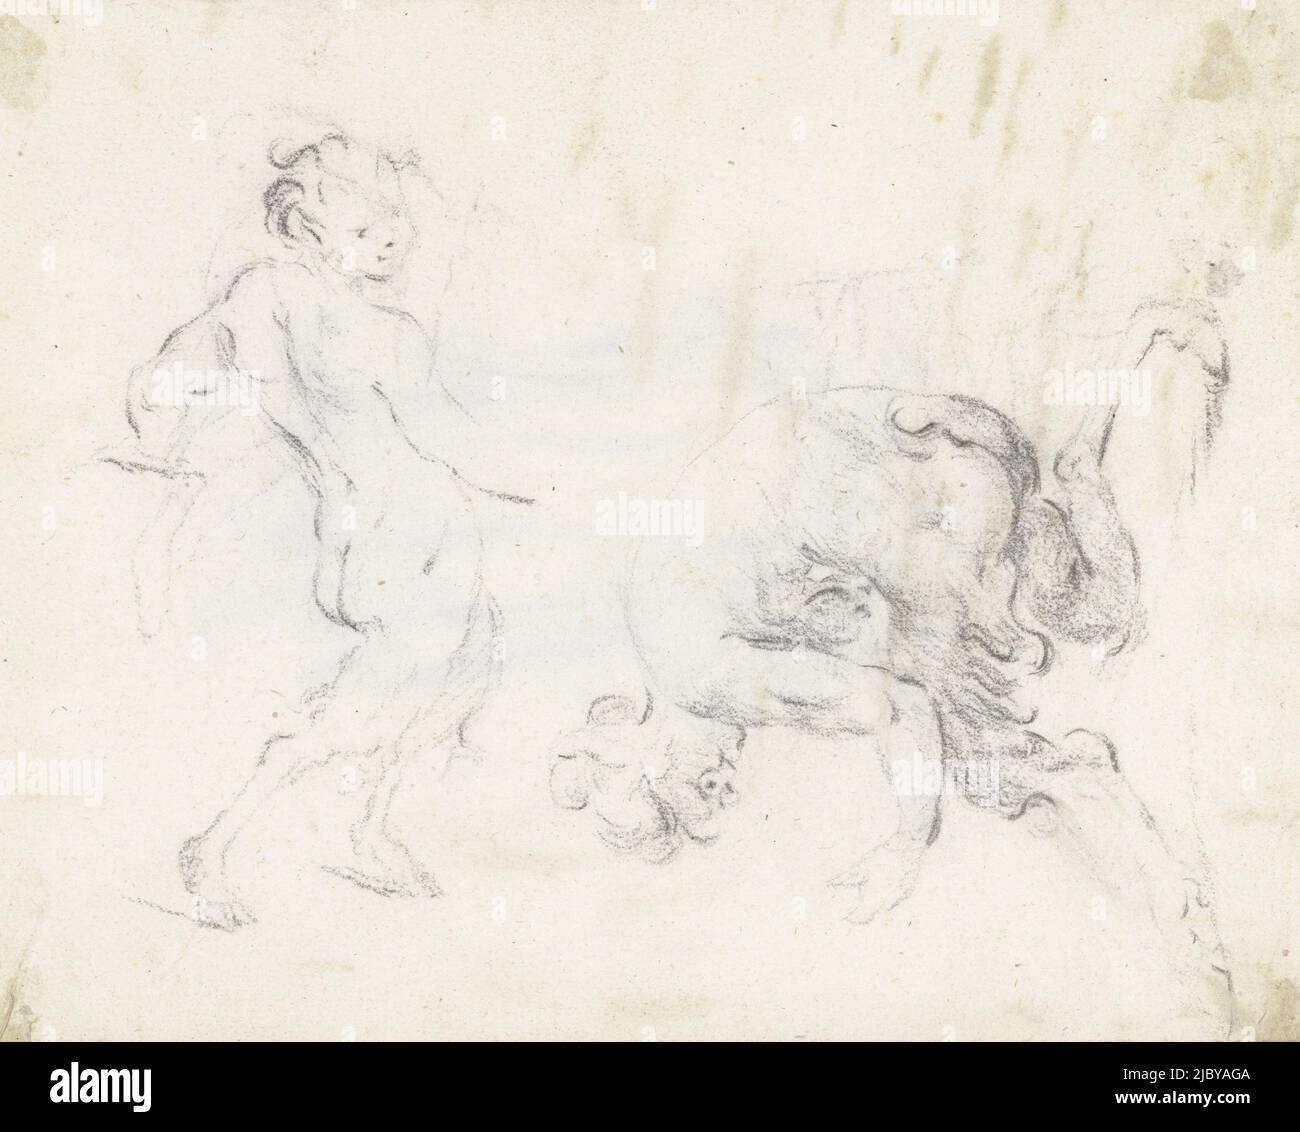 Study sheet with two satyrs, Moses ter Borch, after J. Muller, after Bartholomeus Spranger, c. 1656 - c. 1657, draughtsman: Moses ter Borch, J. Muller, Bartholomeus Spranger, Zwolle, c. 1656 - c. 1657, paper, h 161 mm × w 210 mm Stock Photo